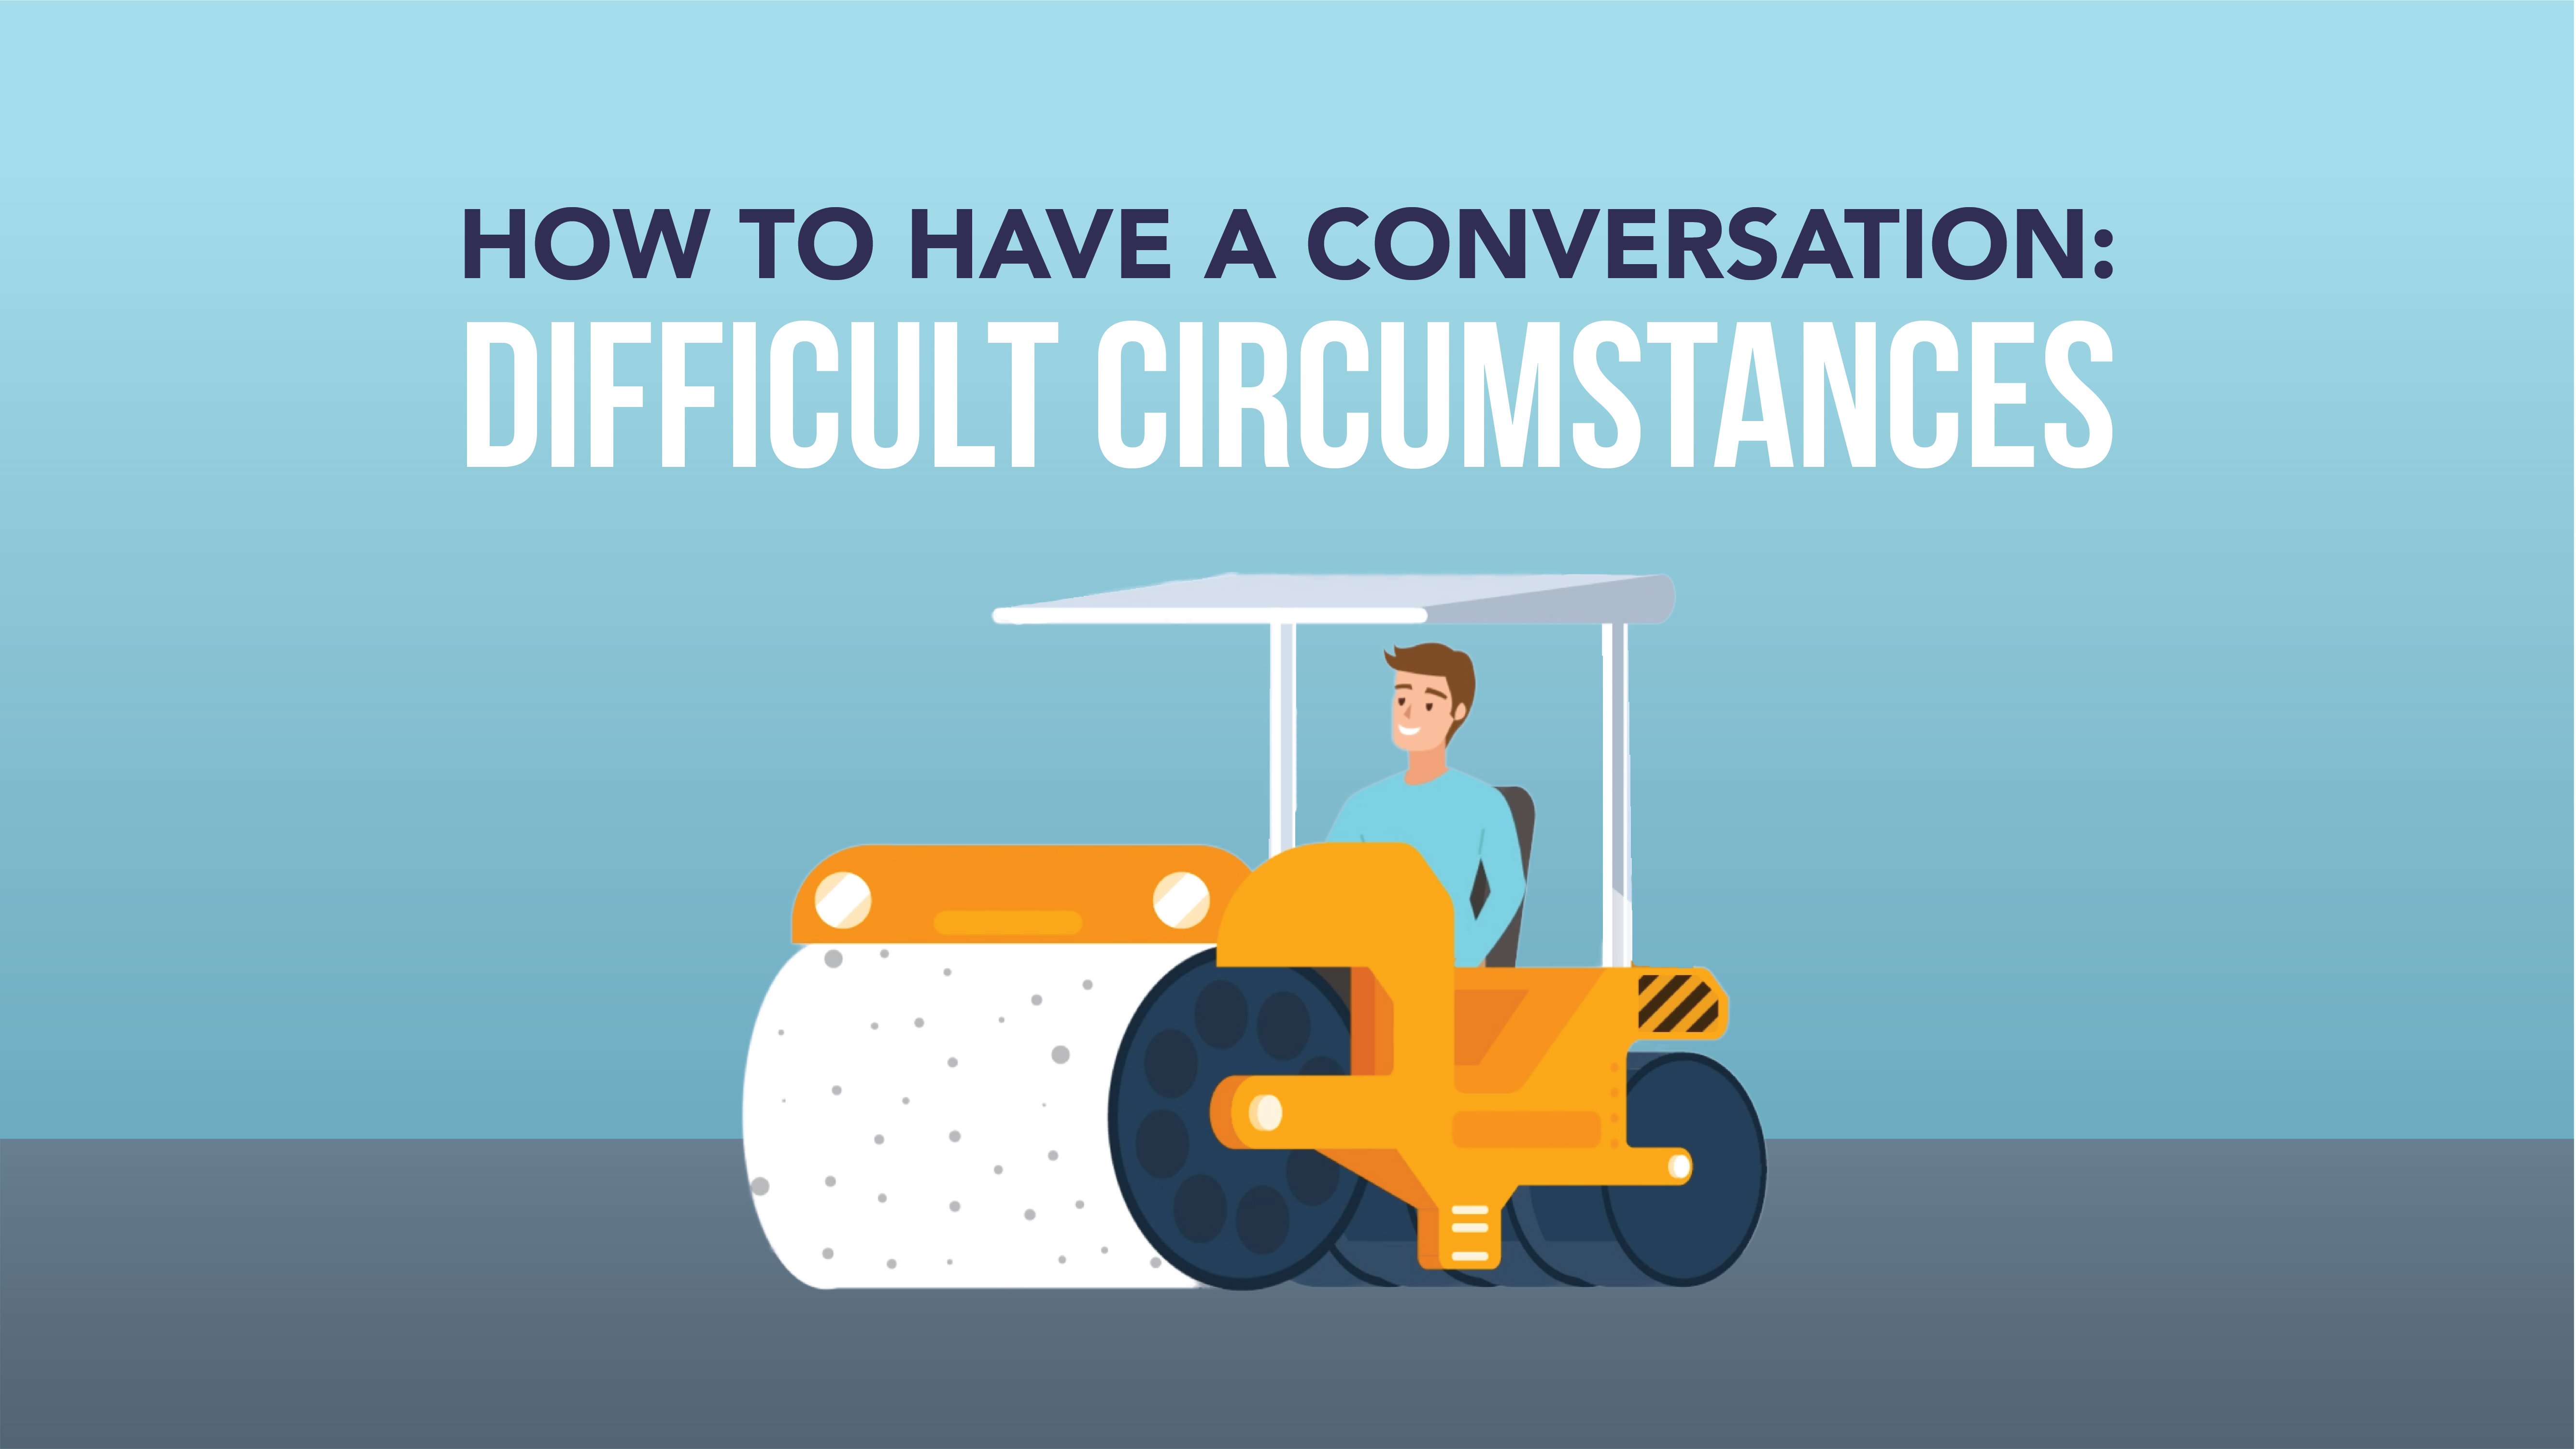 How to Have a Conversation: Difficult Circumstances